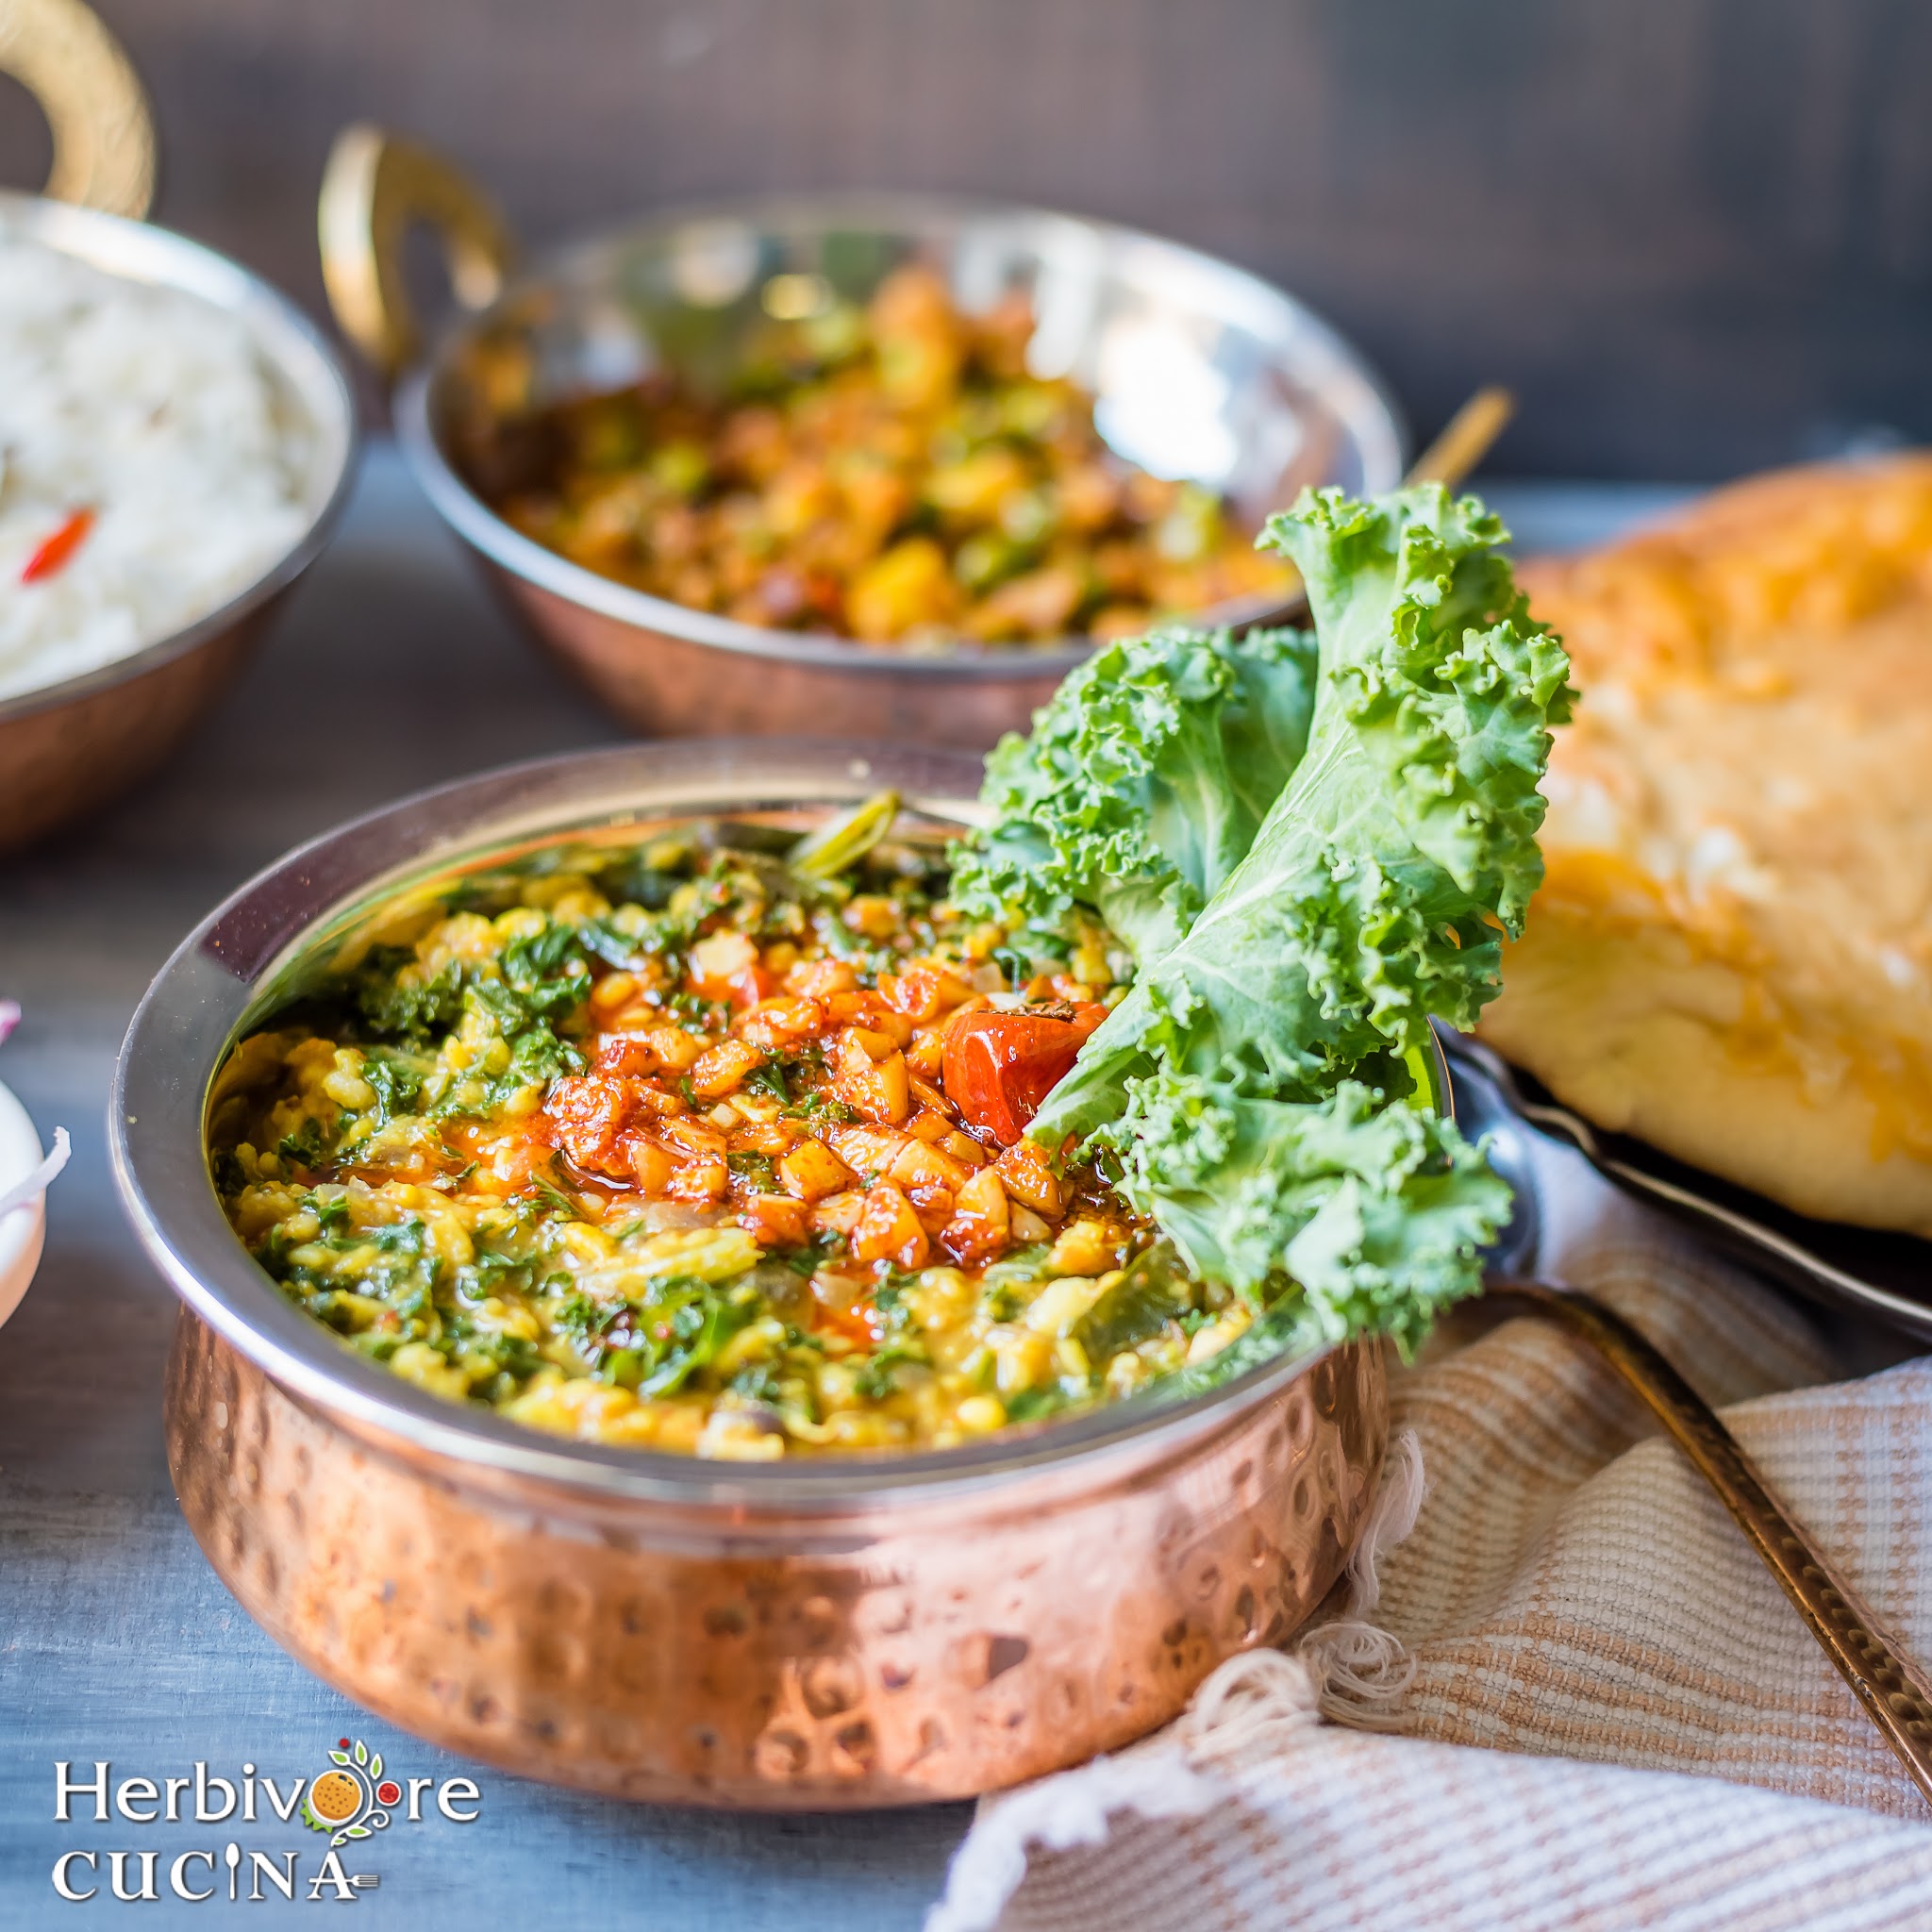 A copper kadhai filled with Kale and moong Dal and tempered with garlic; served along with some steamed rice, naan and vegetable.